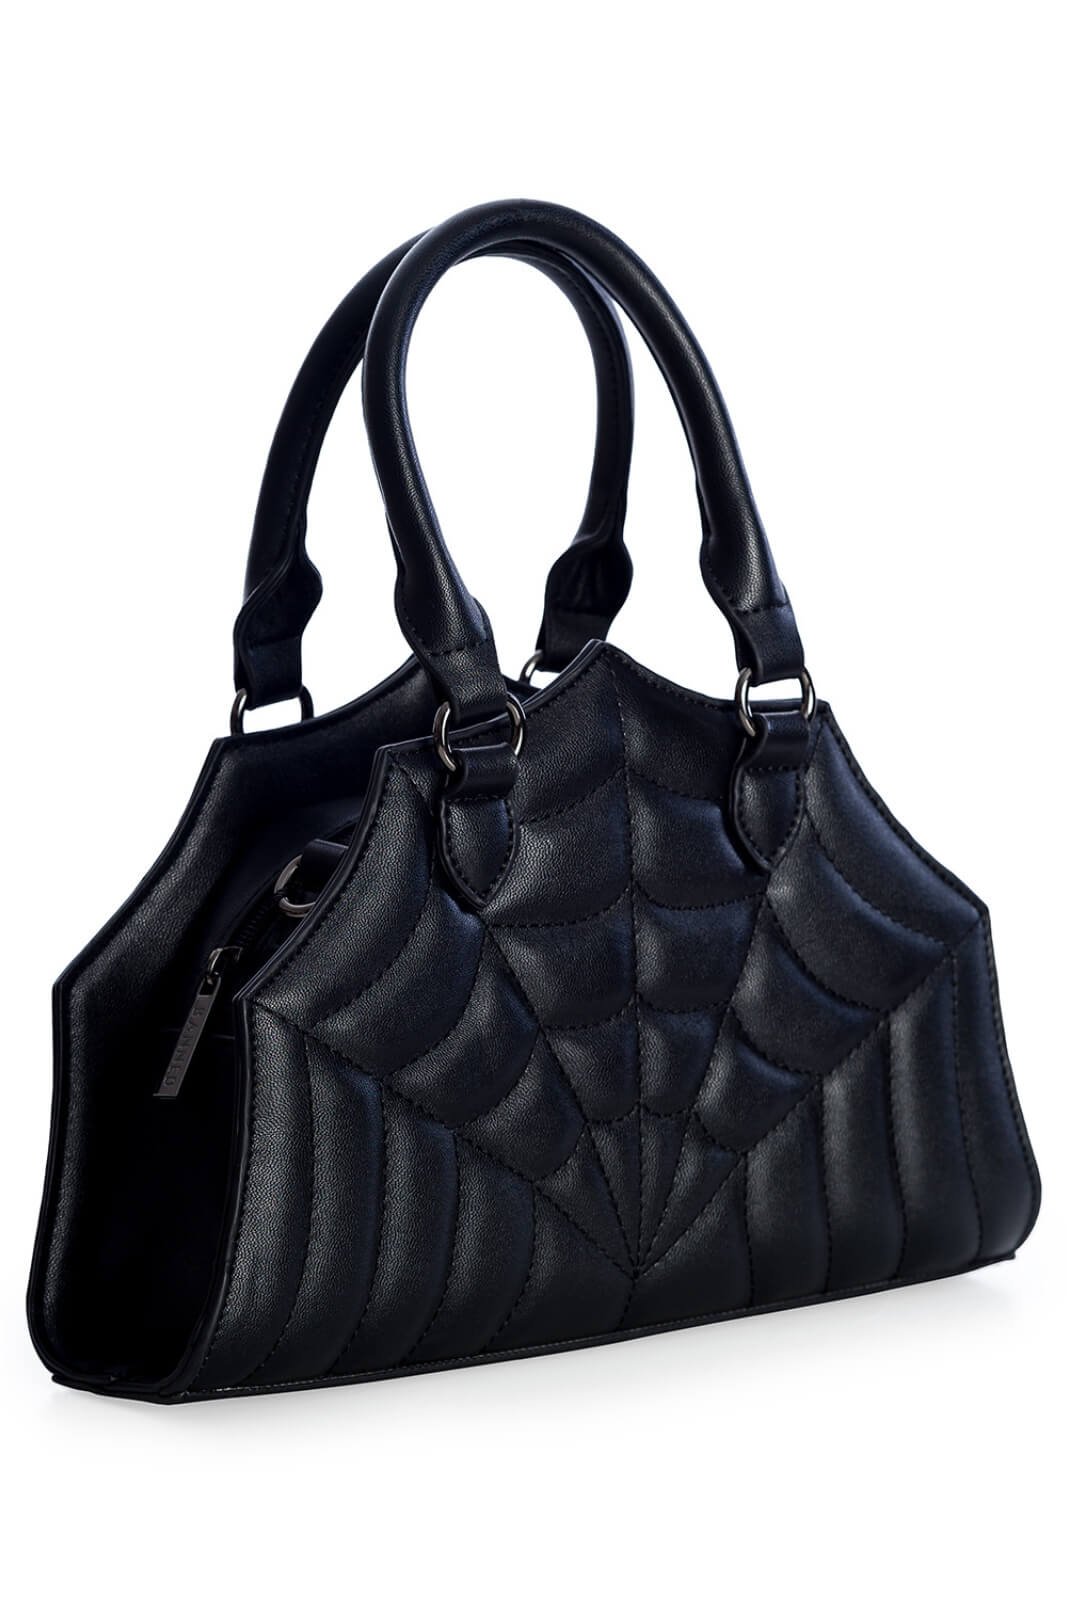 Banned Sirin Quilted Spiderweb Gothic Bag